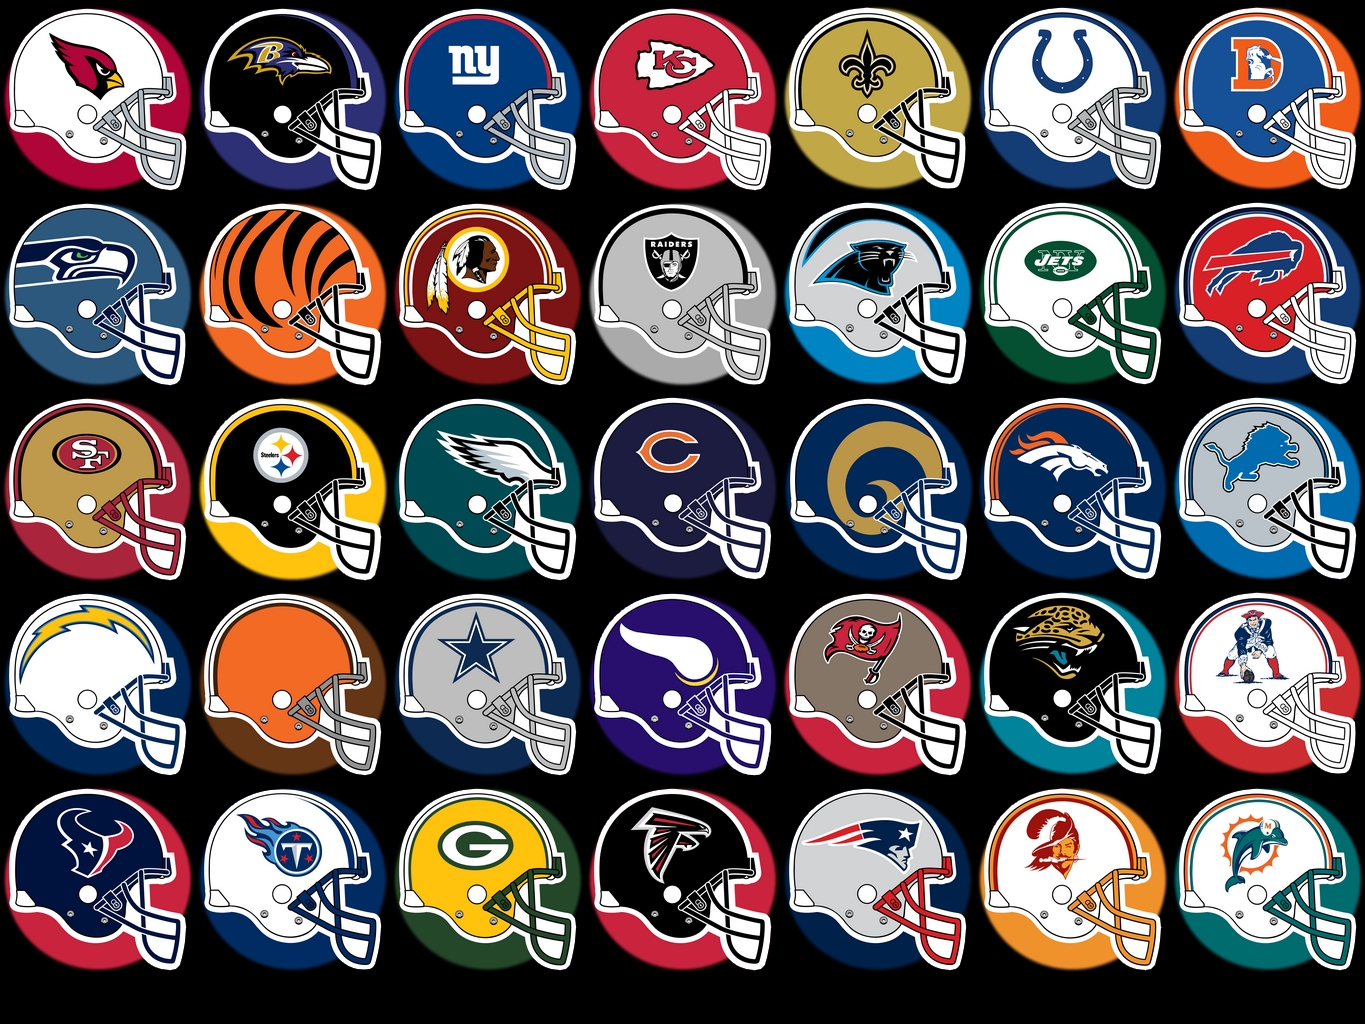 free-download-nfl-team-logos-photo-278-of-416-phombocom-1365x1024-for